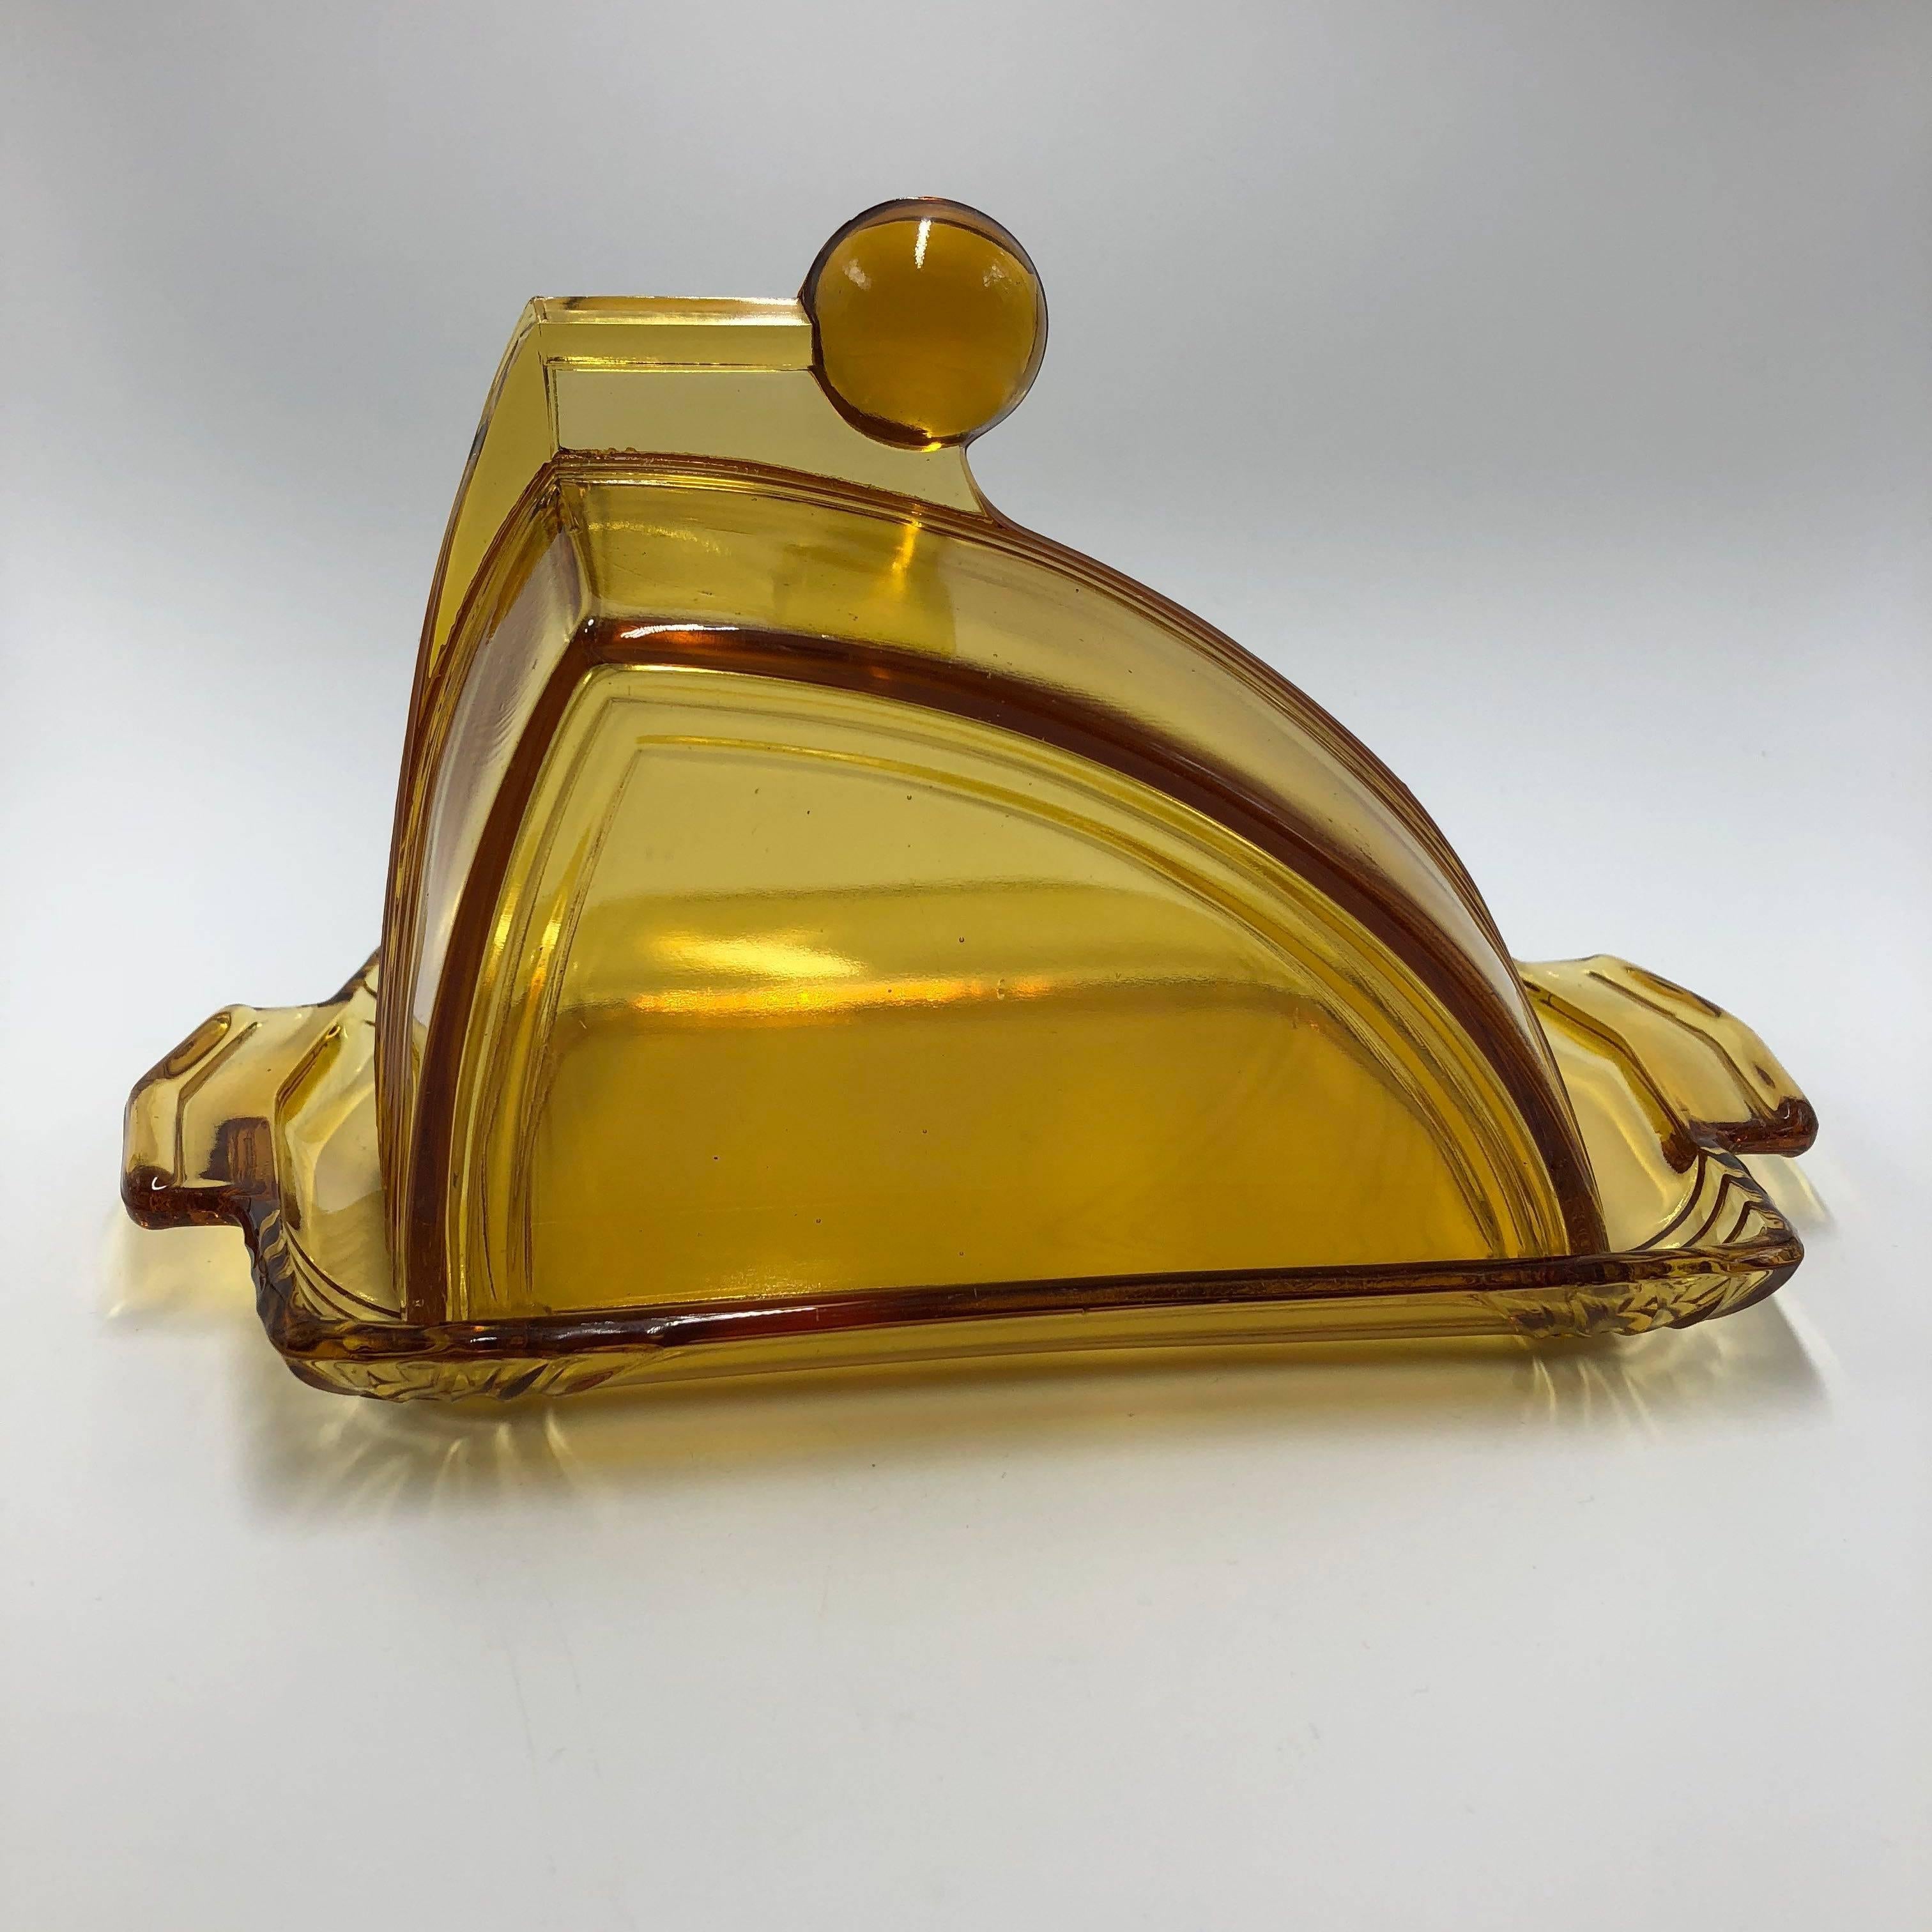 Art Deco cheese dome attributed to Copier for Leerdam. 
Made from amber pressed glass. 
In excellent vintage condition.